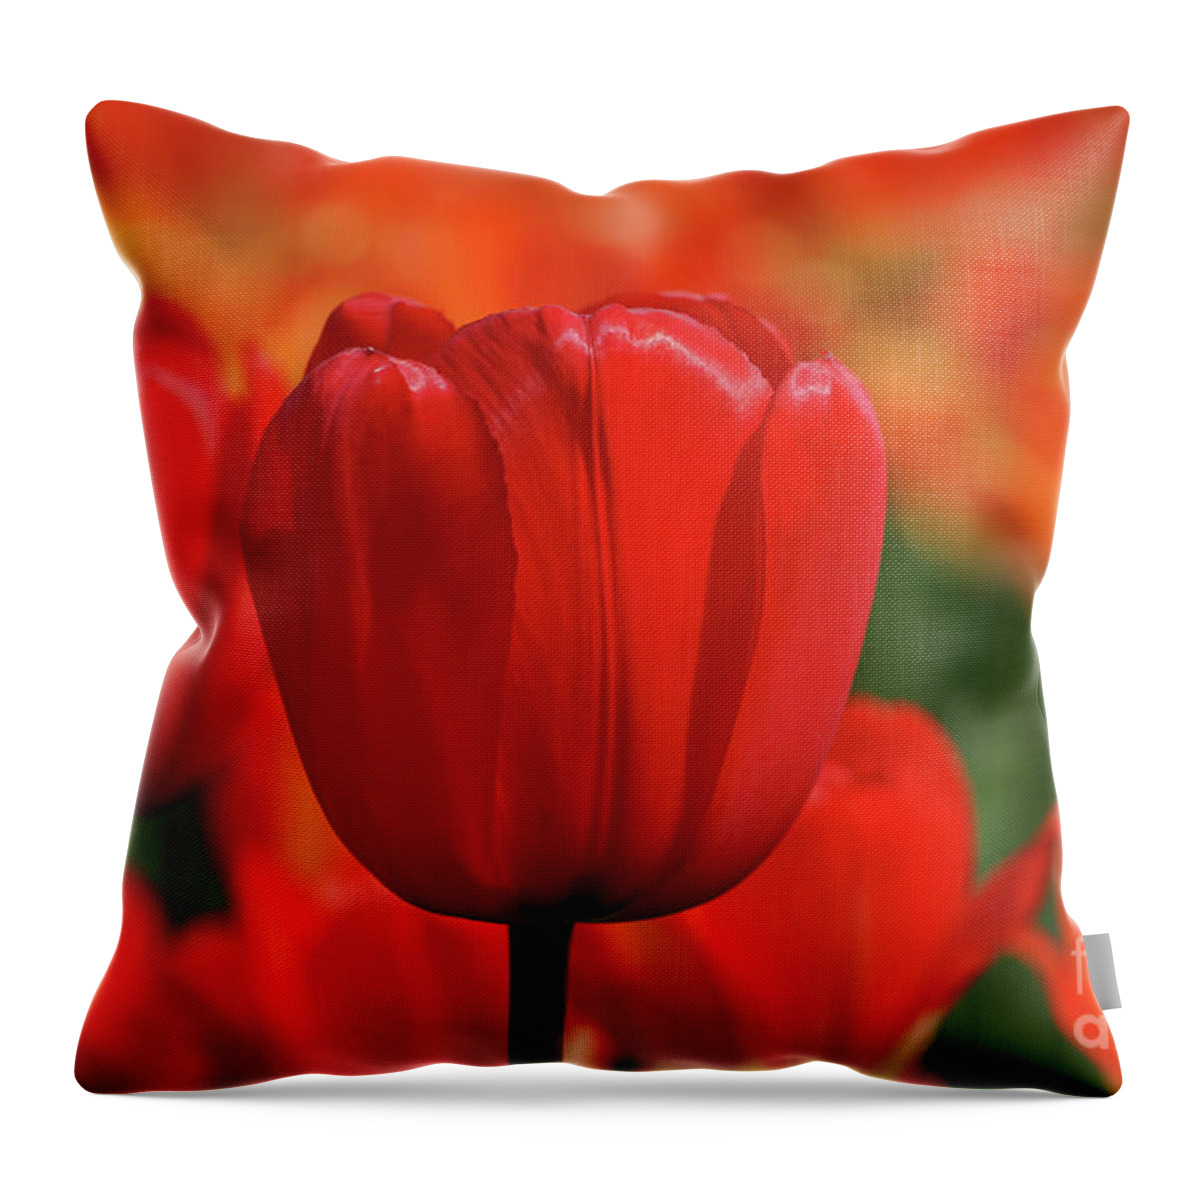 Tulip Intensity Throw Pillow featuring the photograph Tulip Intensity by Rachel Cohen